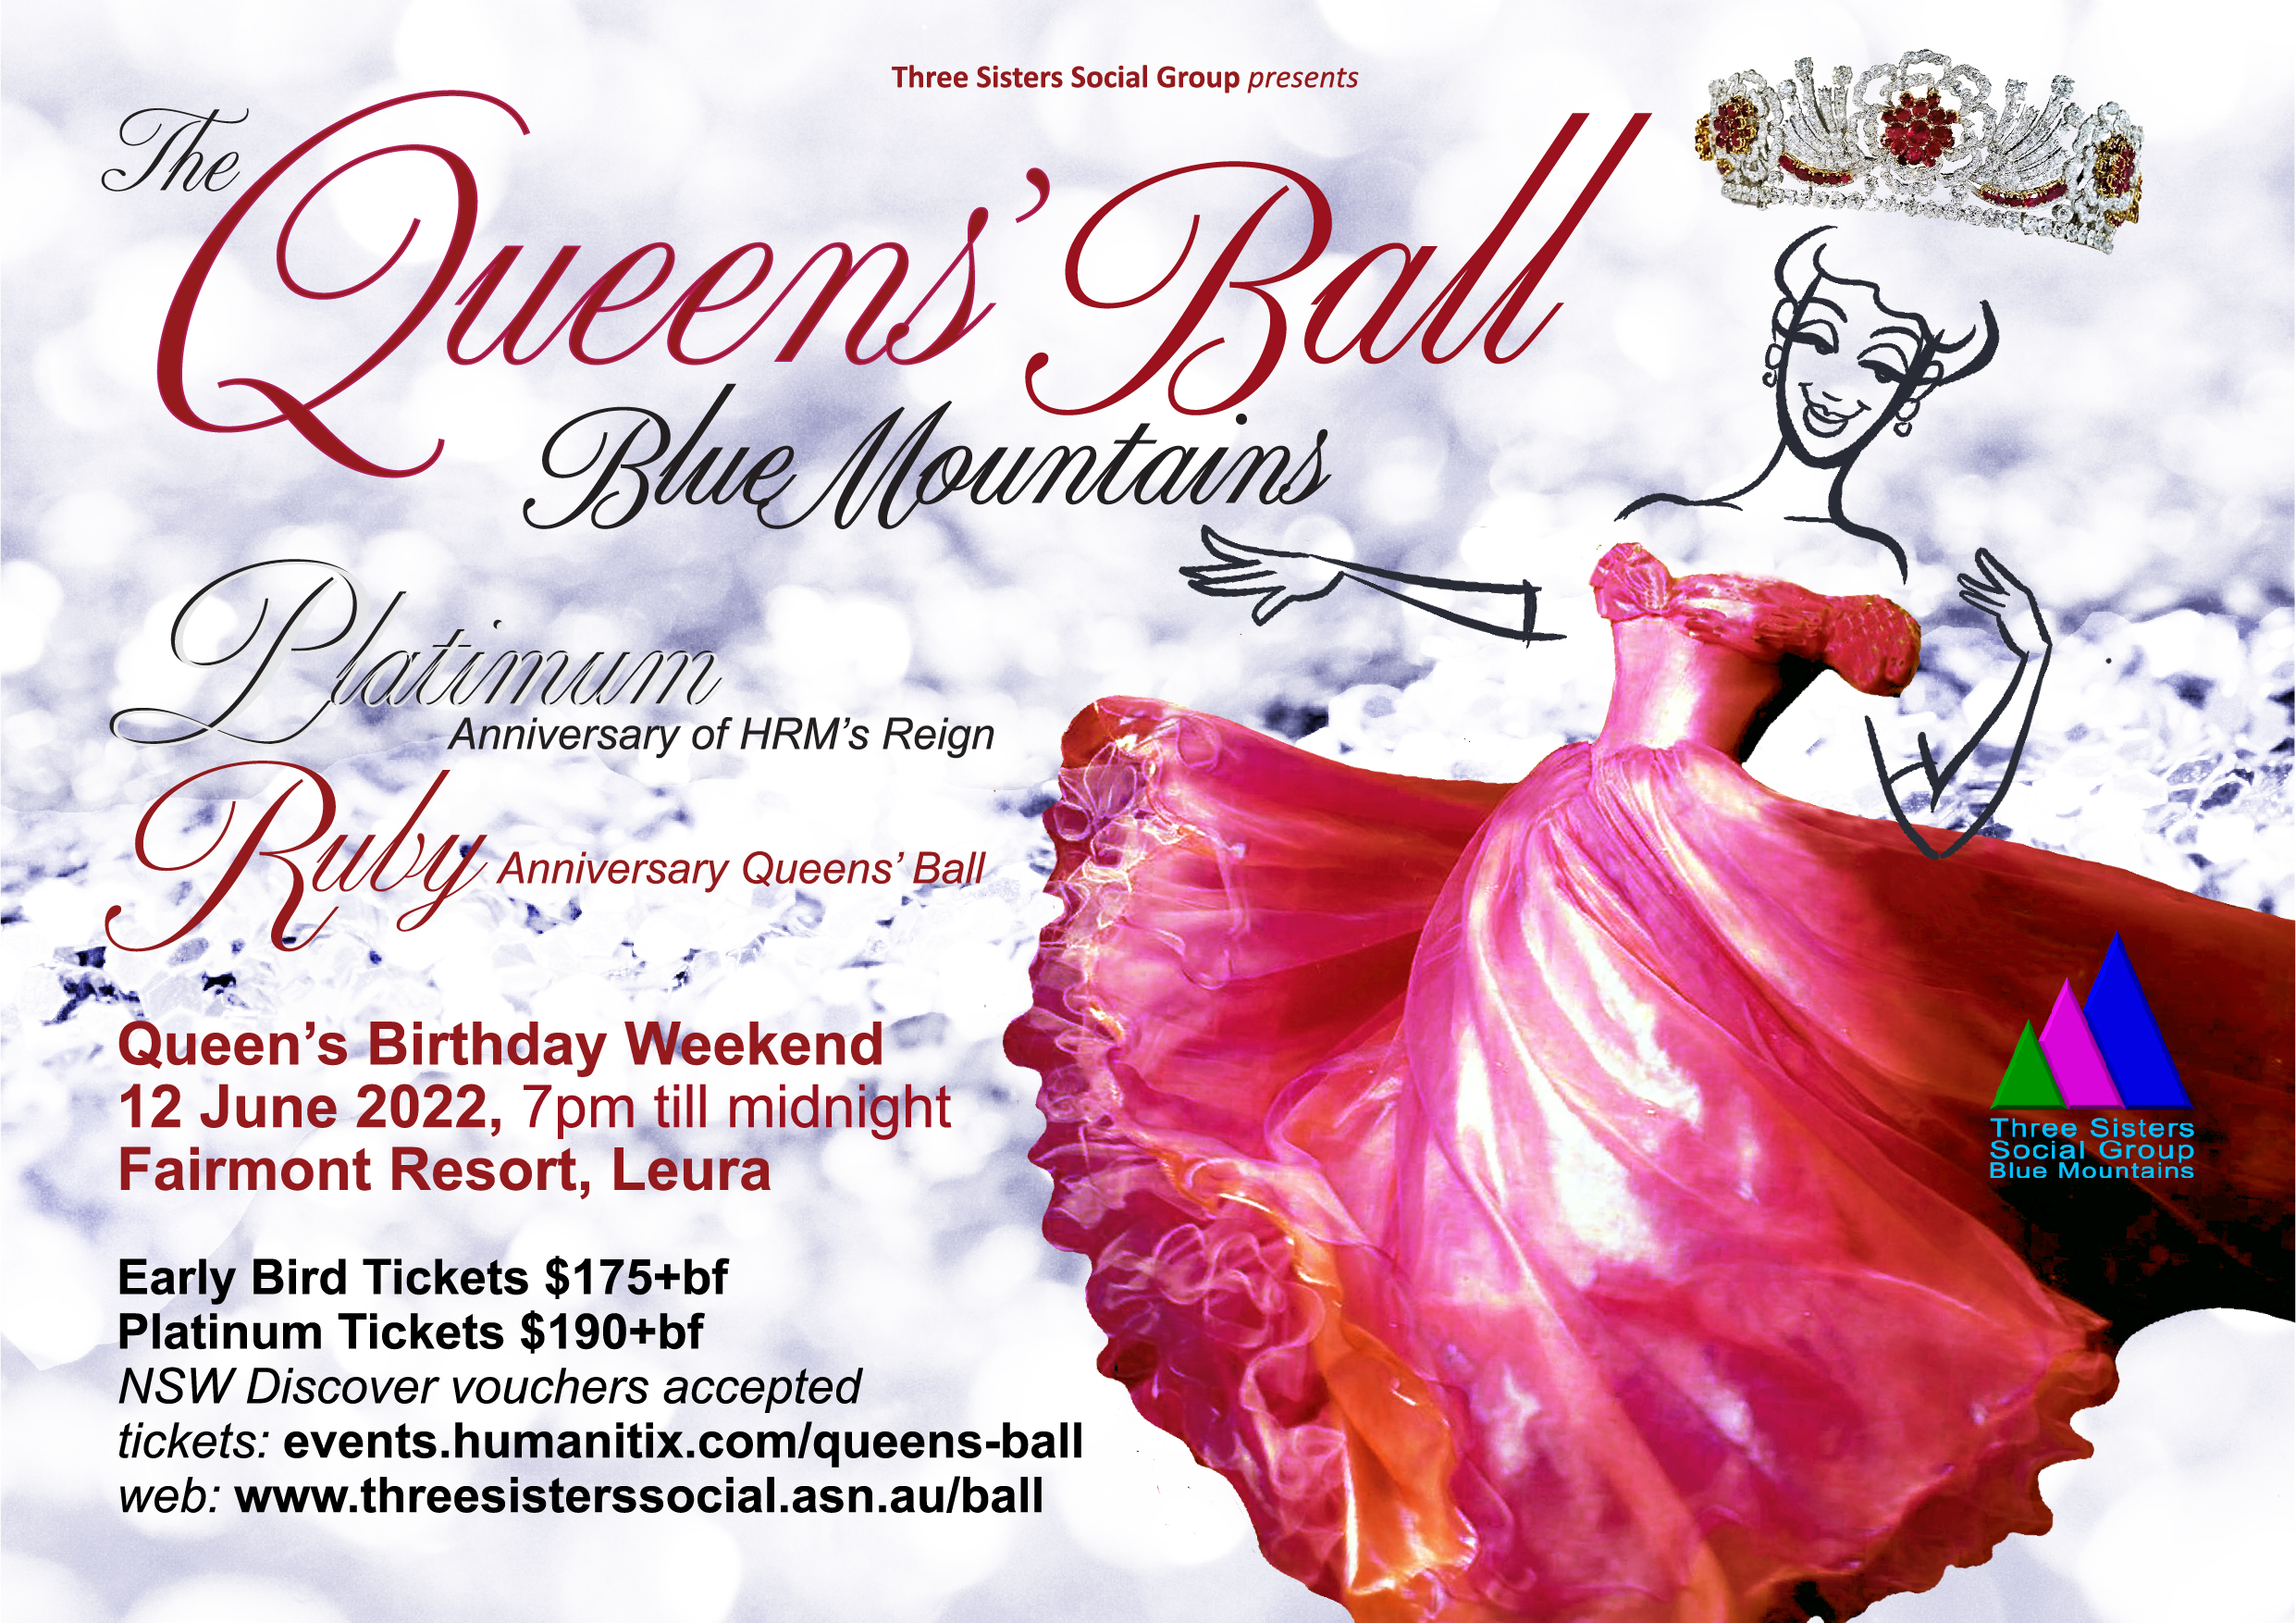 Flyer design for event promotion for Queens Ball event Three Sisters Group.